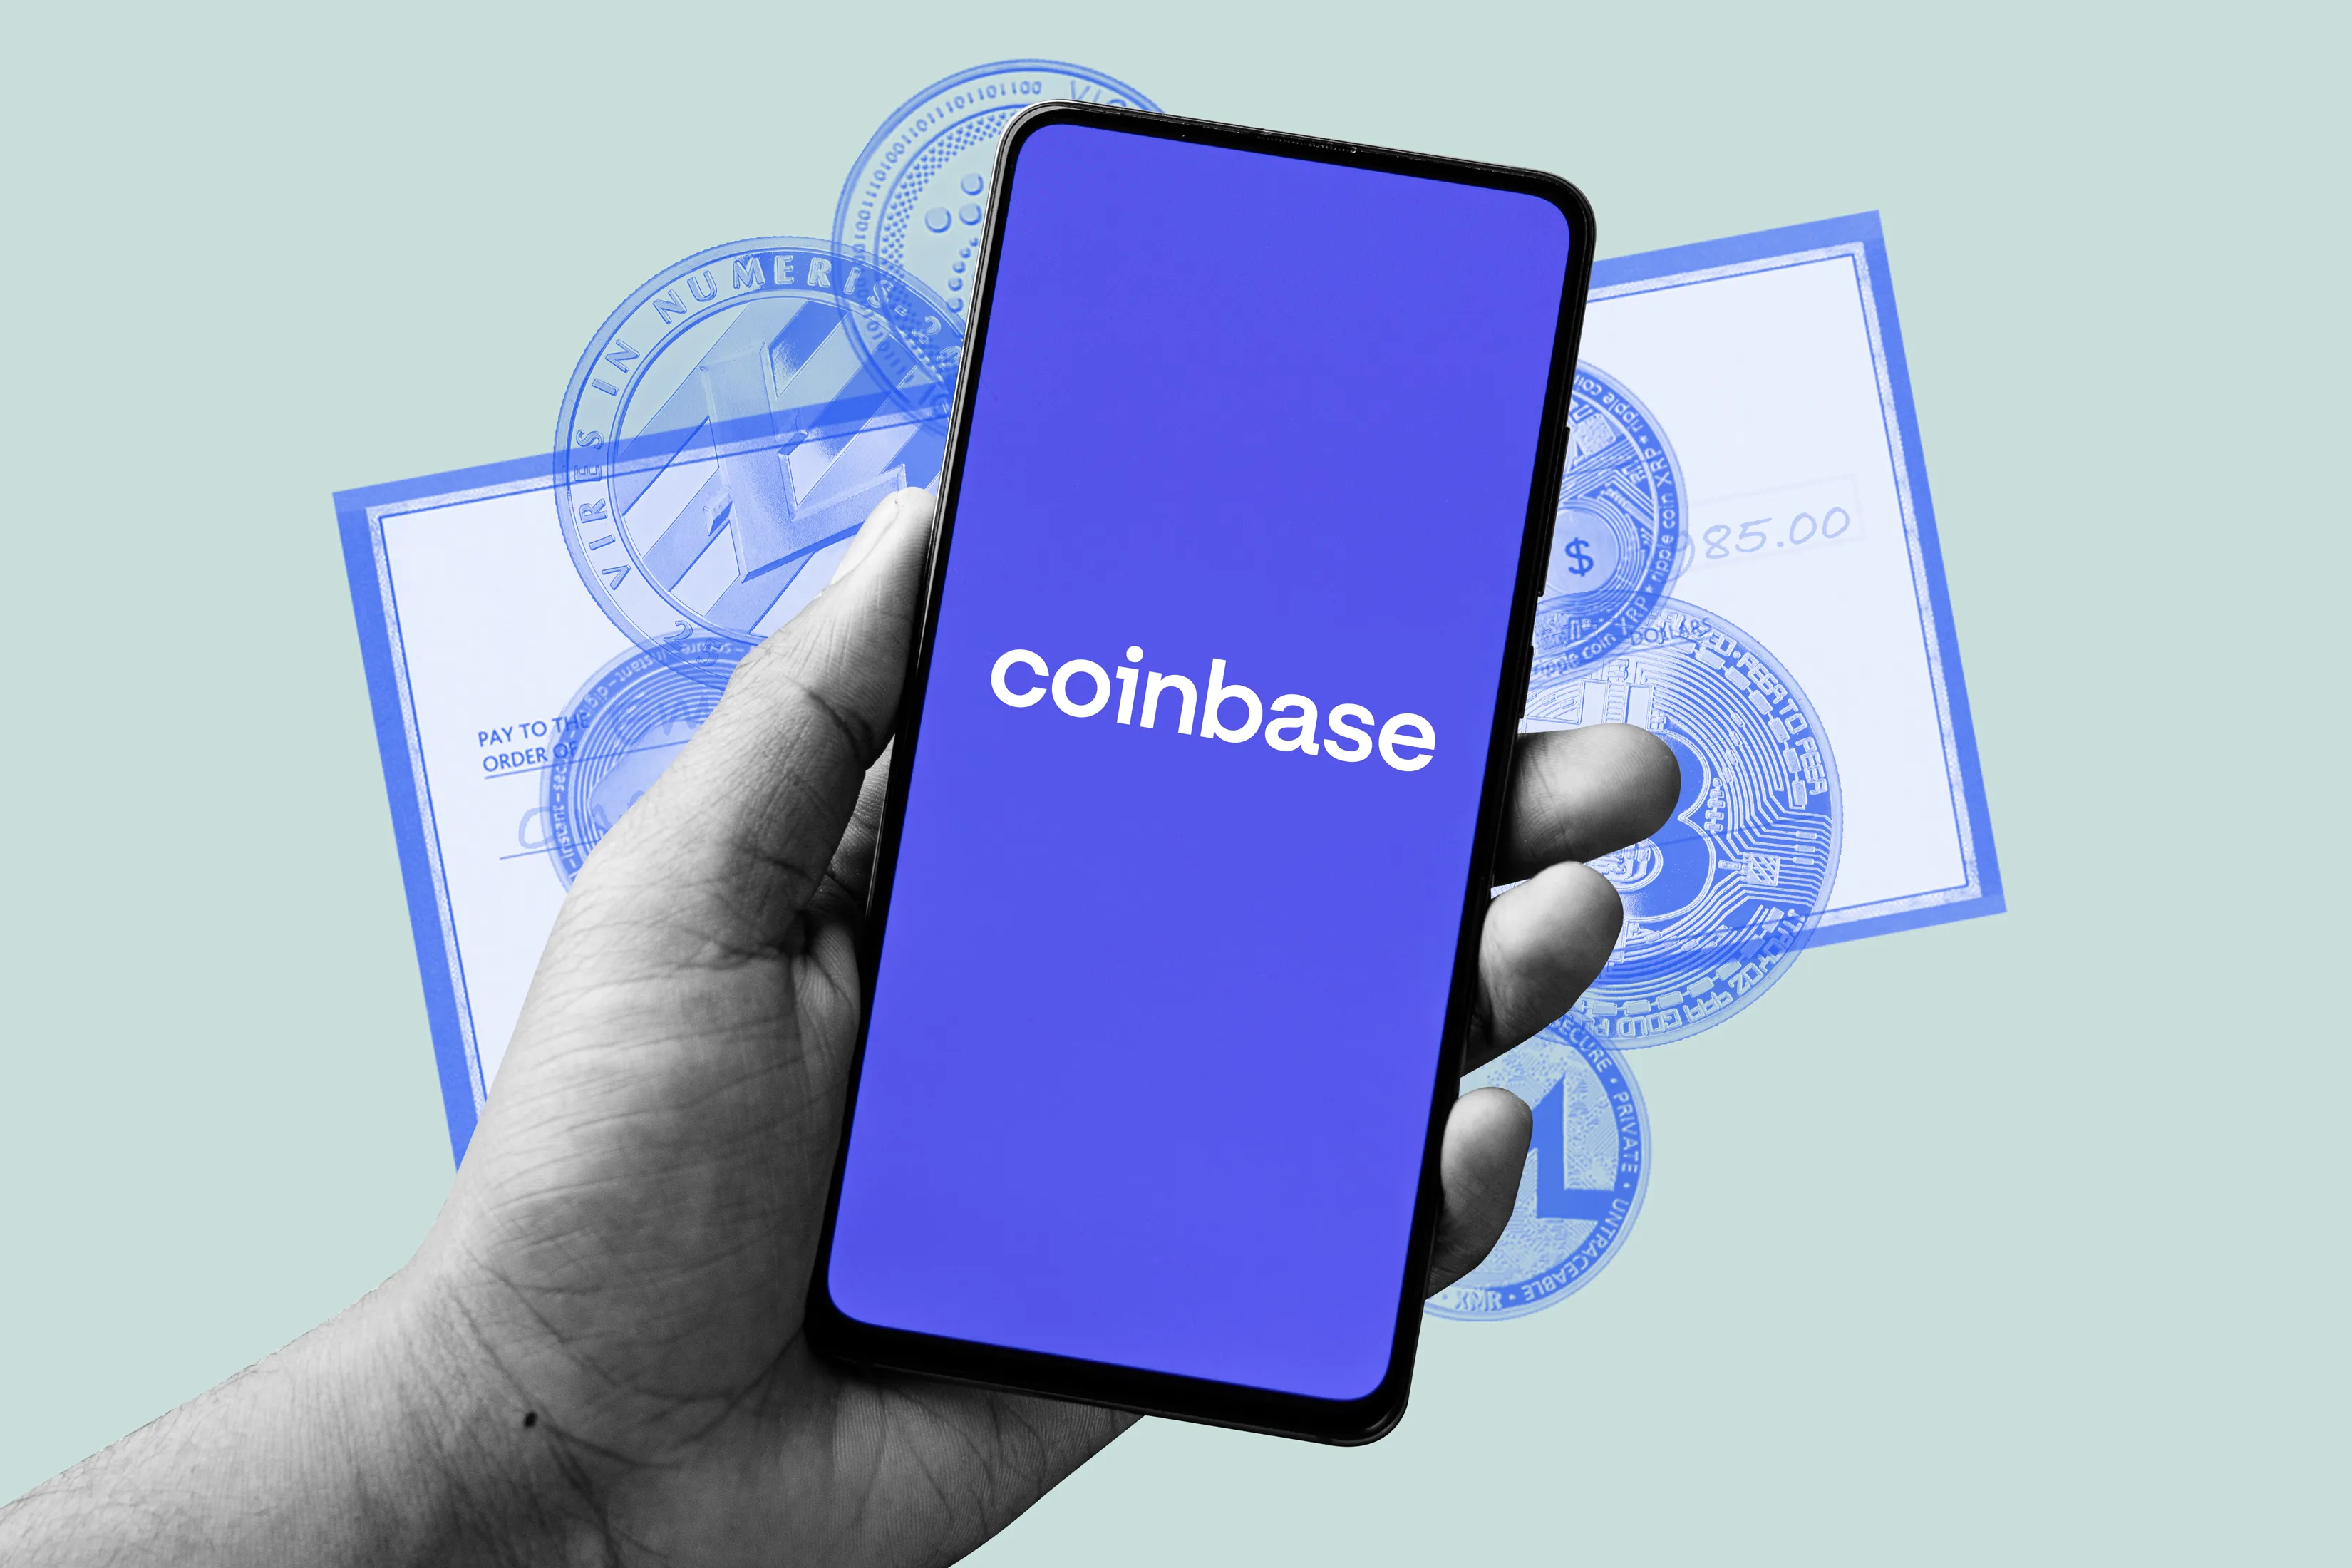 Workers in the US now have the option to be paid via Coinbase - Qoin